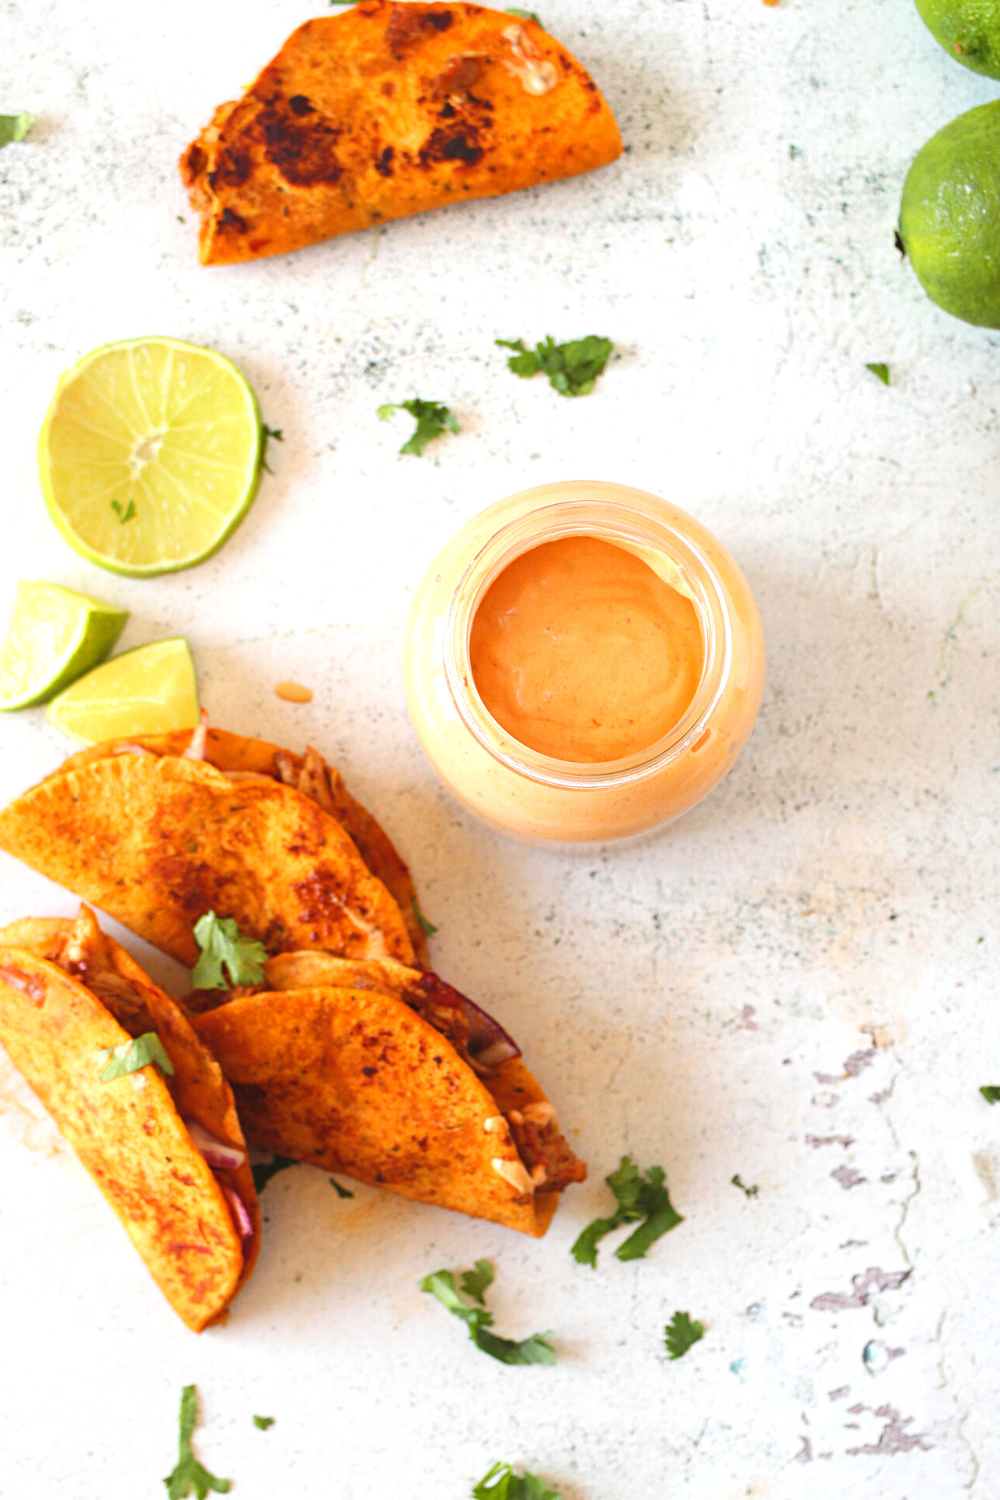 copycat keto chipotle sauce that is great for keto tacos